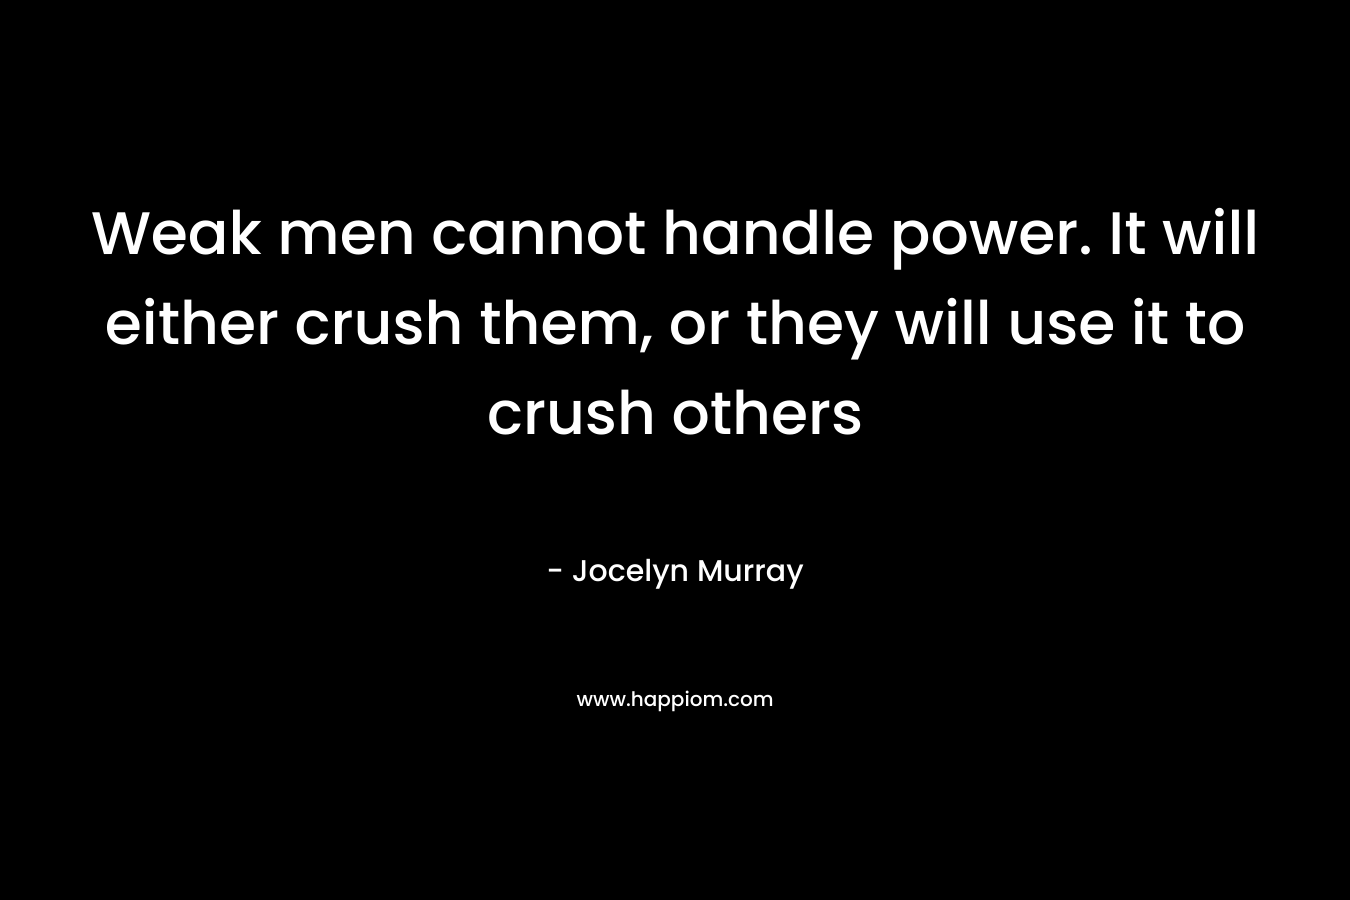 Weak men cannot handle power. It will either crush them, or they will use it to crush others